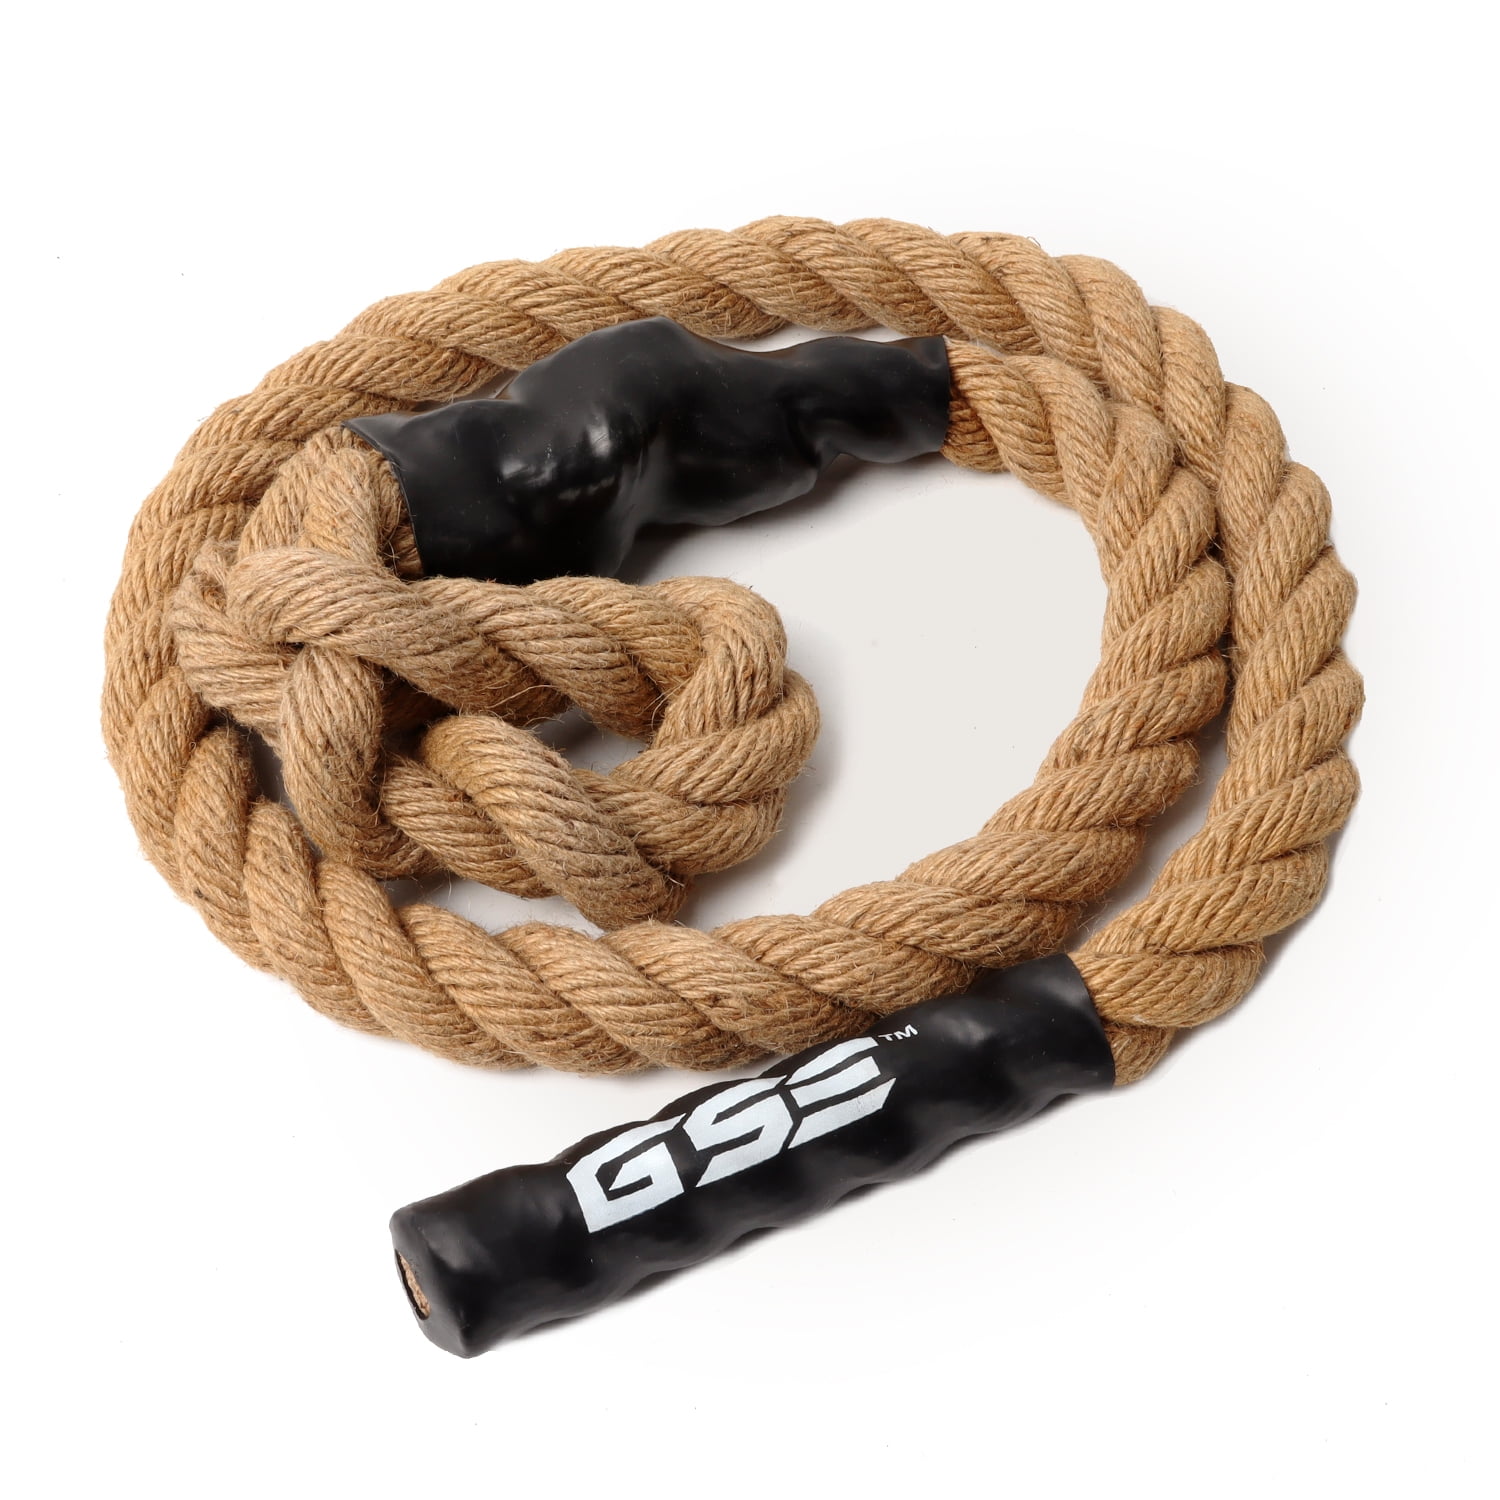 GSE Games & Sports Expert Sisal Gym Fitness Training Rope. 1.5